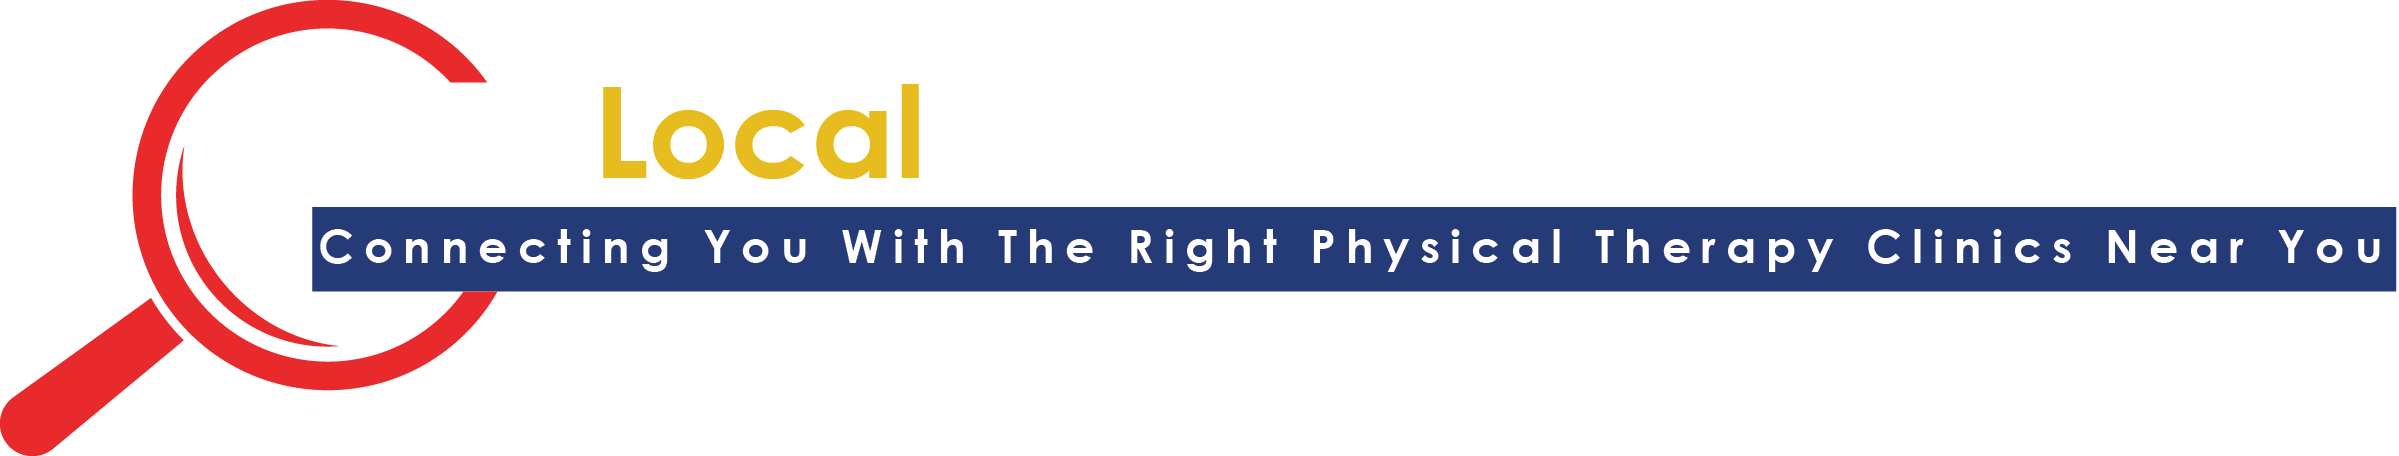 Find Local Physical Therapy Clincs Near Me